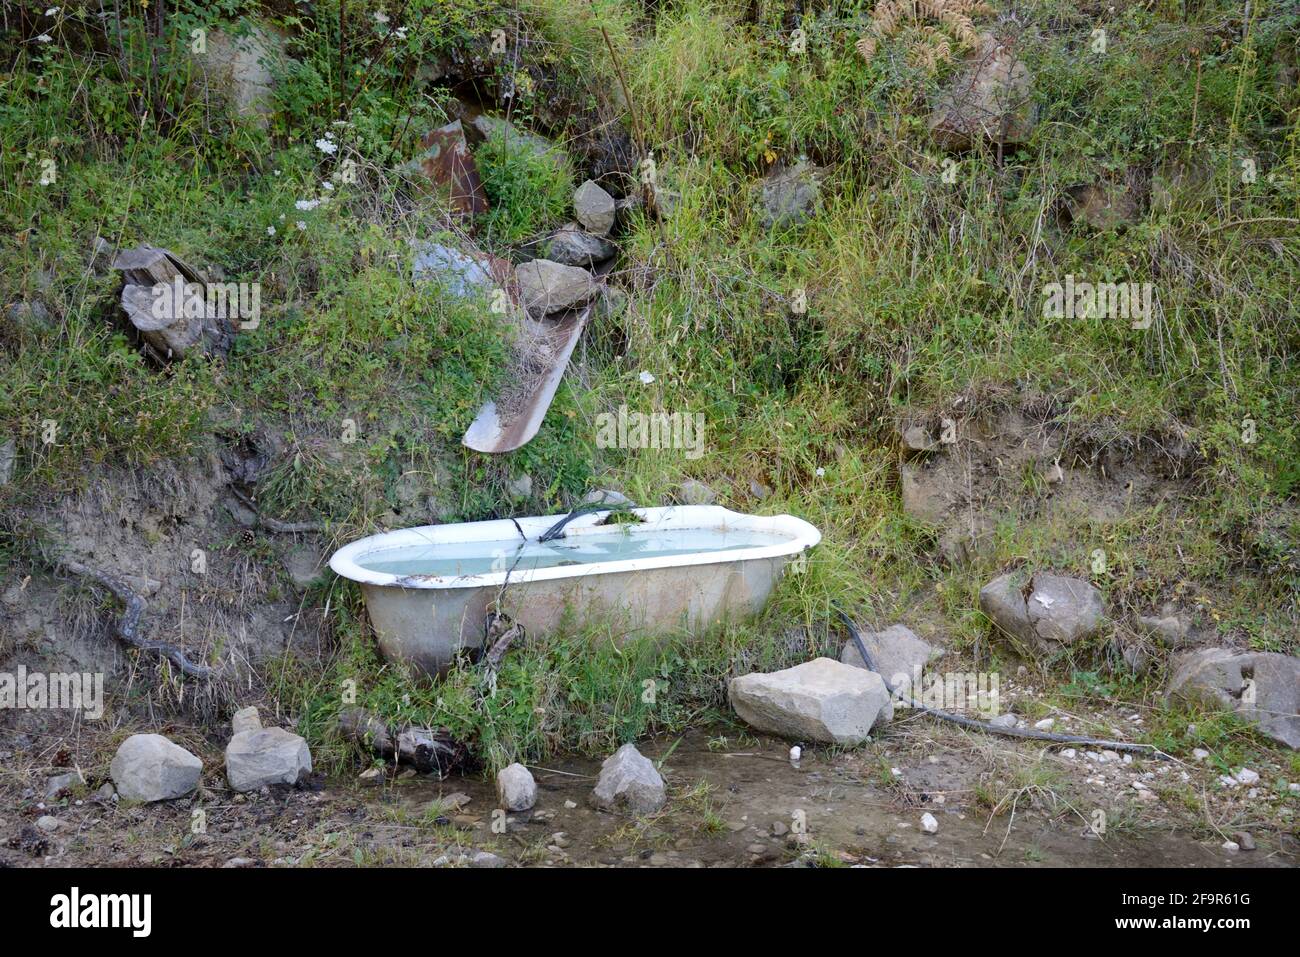 Old Bath, Bathtub, Tub or Water Bath Recycled as Animal Trough in the Alpes-de-Haute-Provence French Alps France Stock Photo